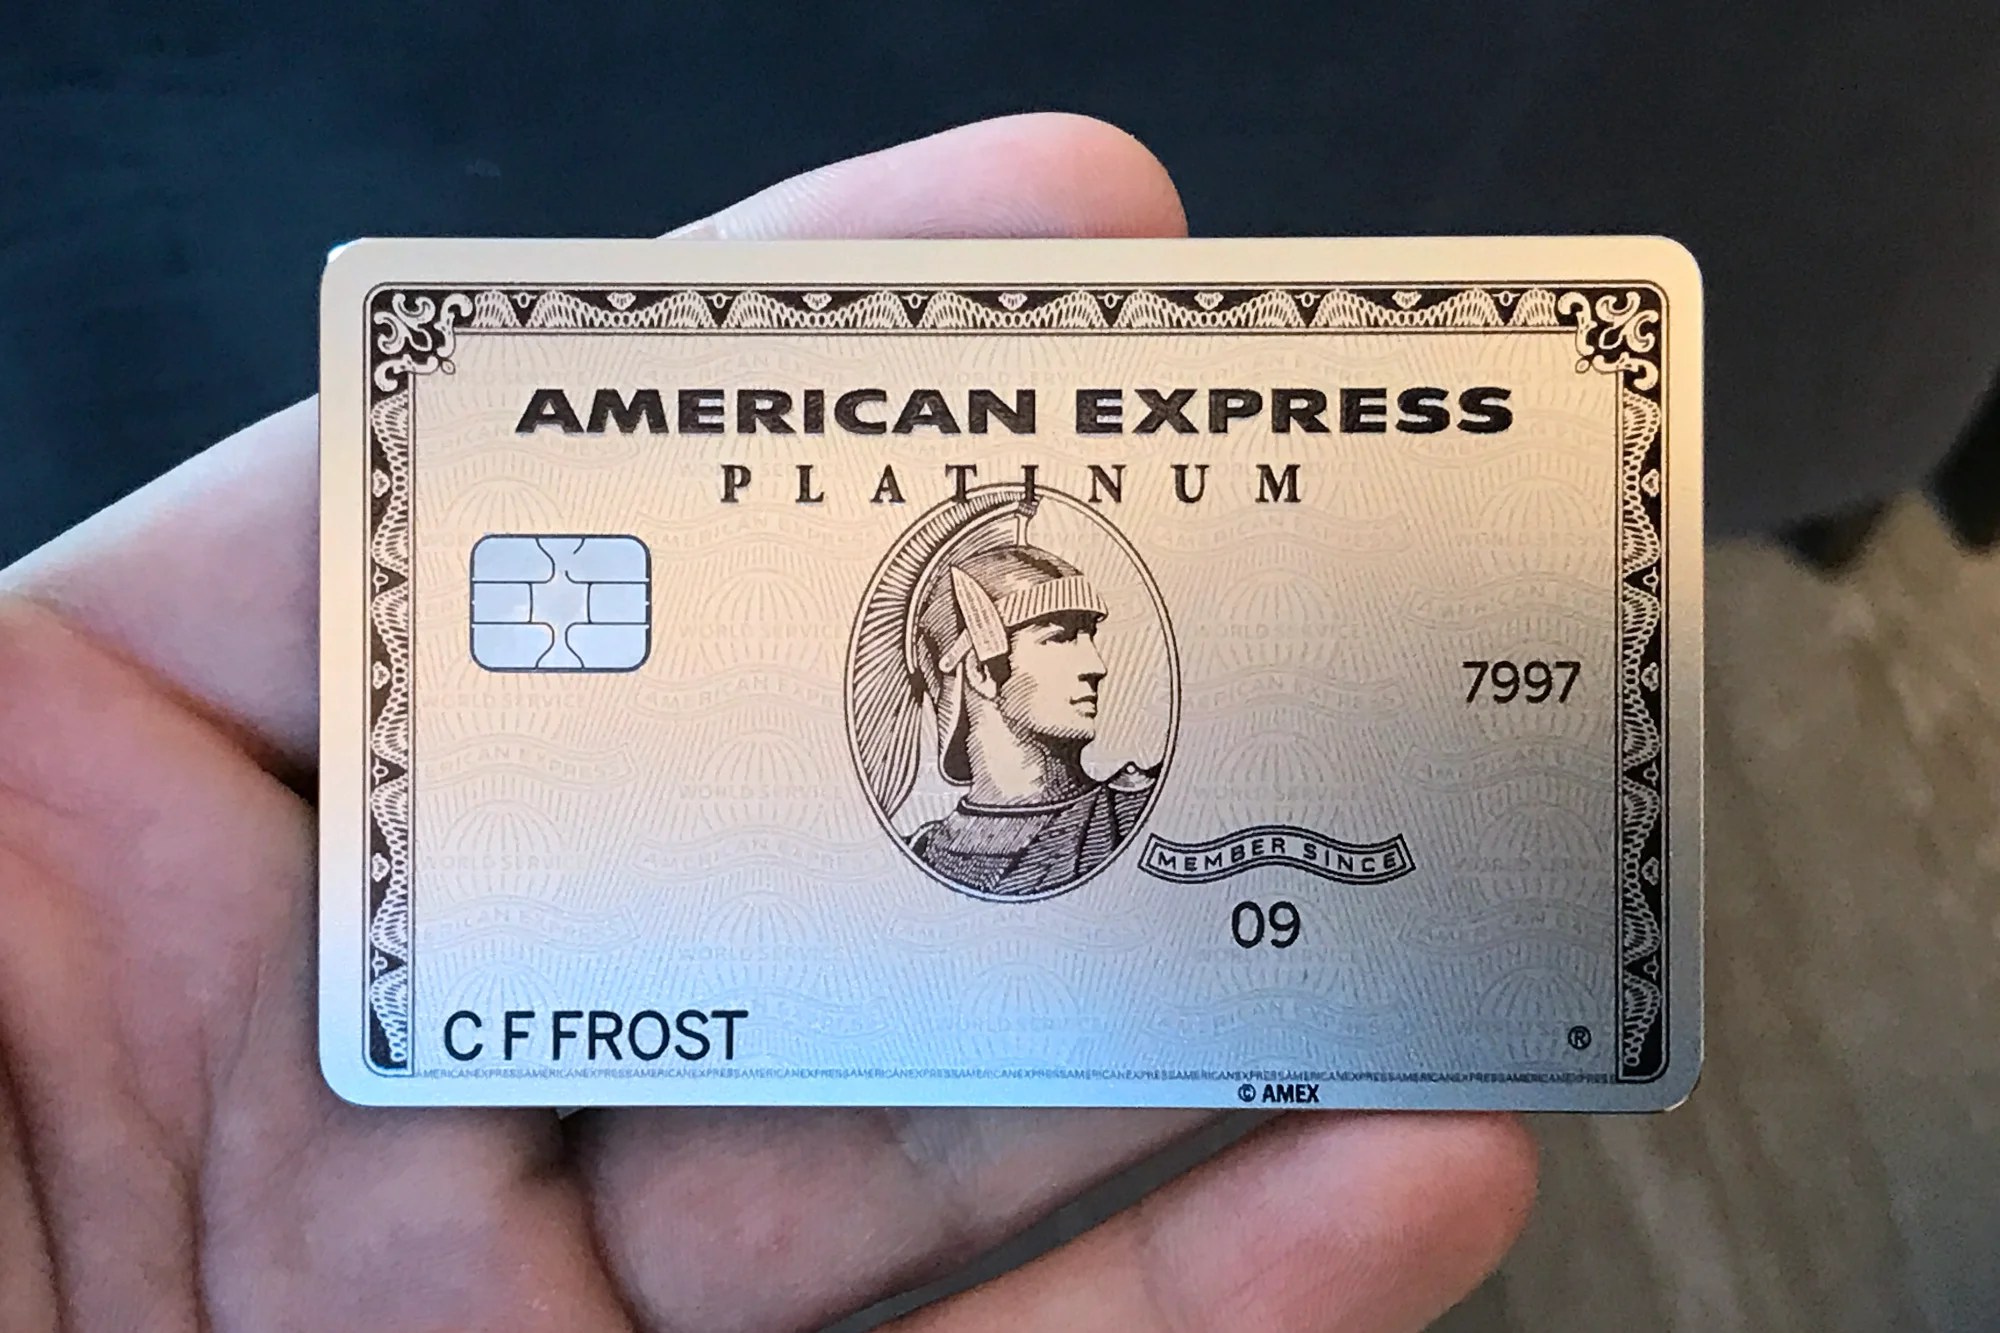 A Brief Guide to Earning and Using AMEX Airline Credit